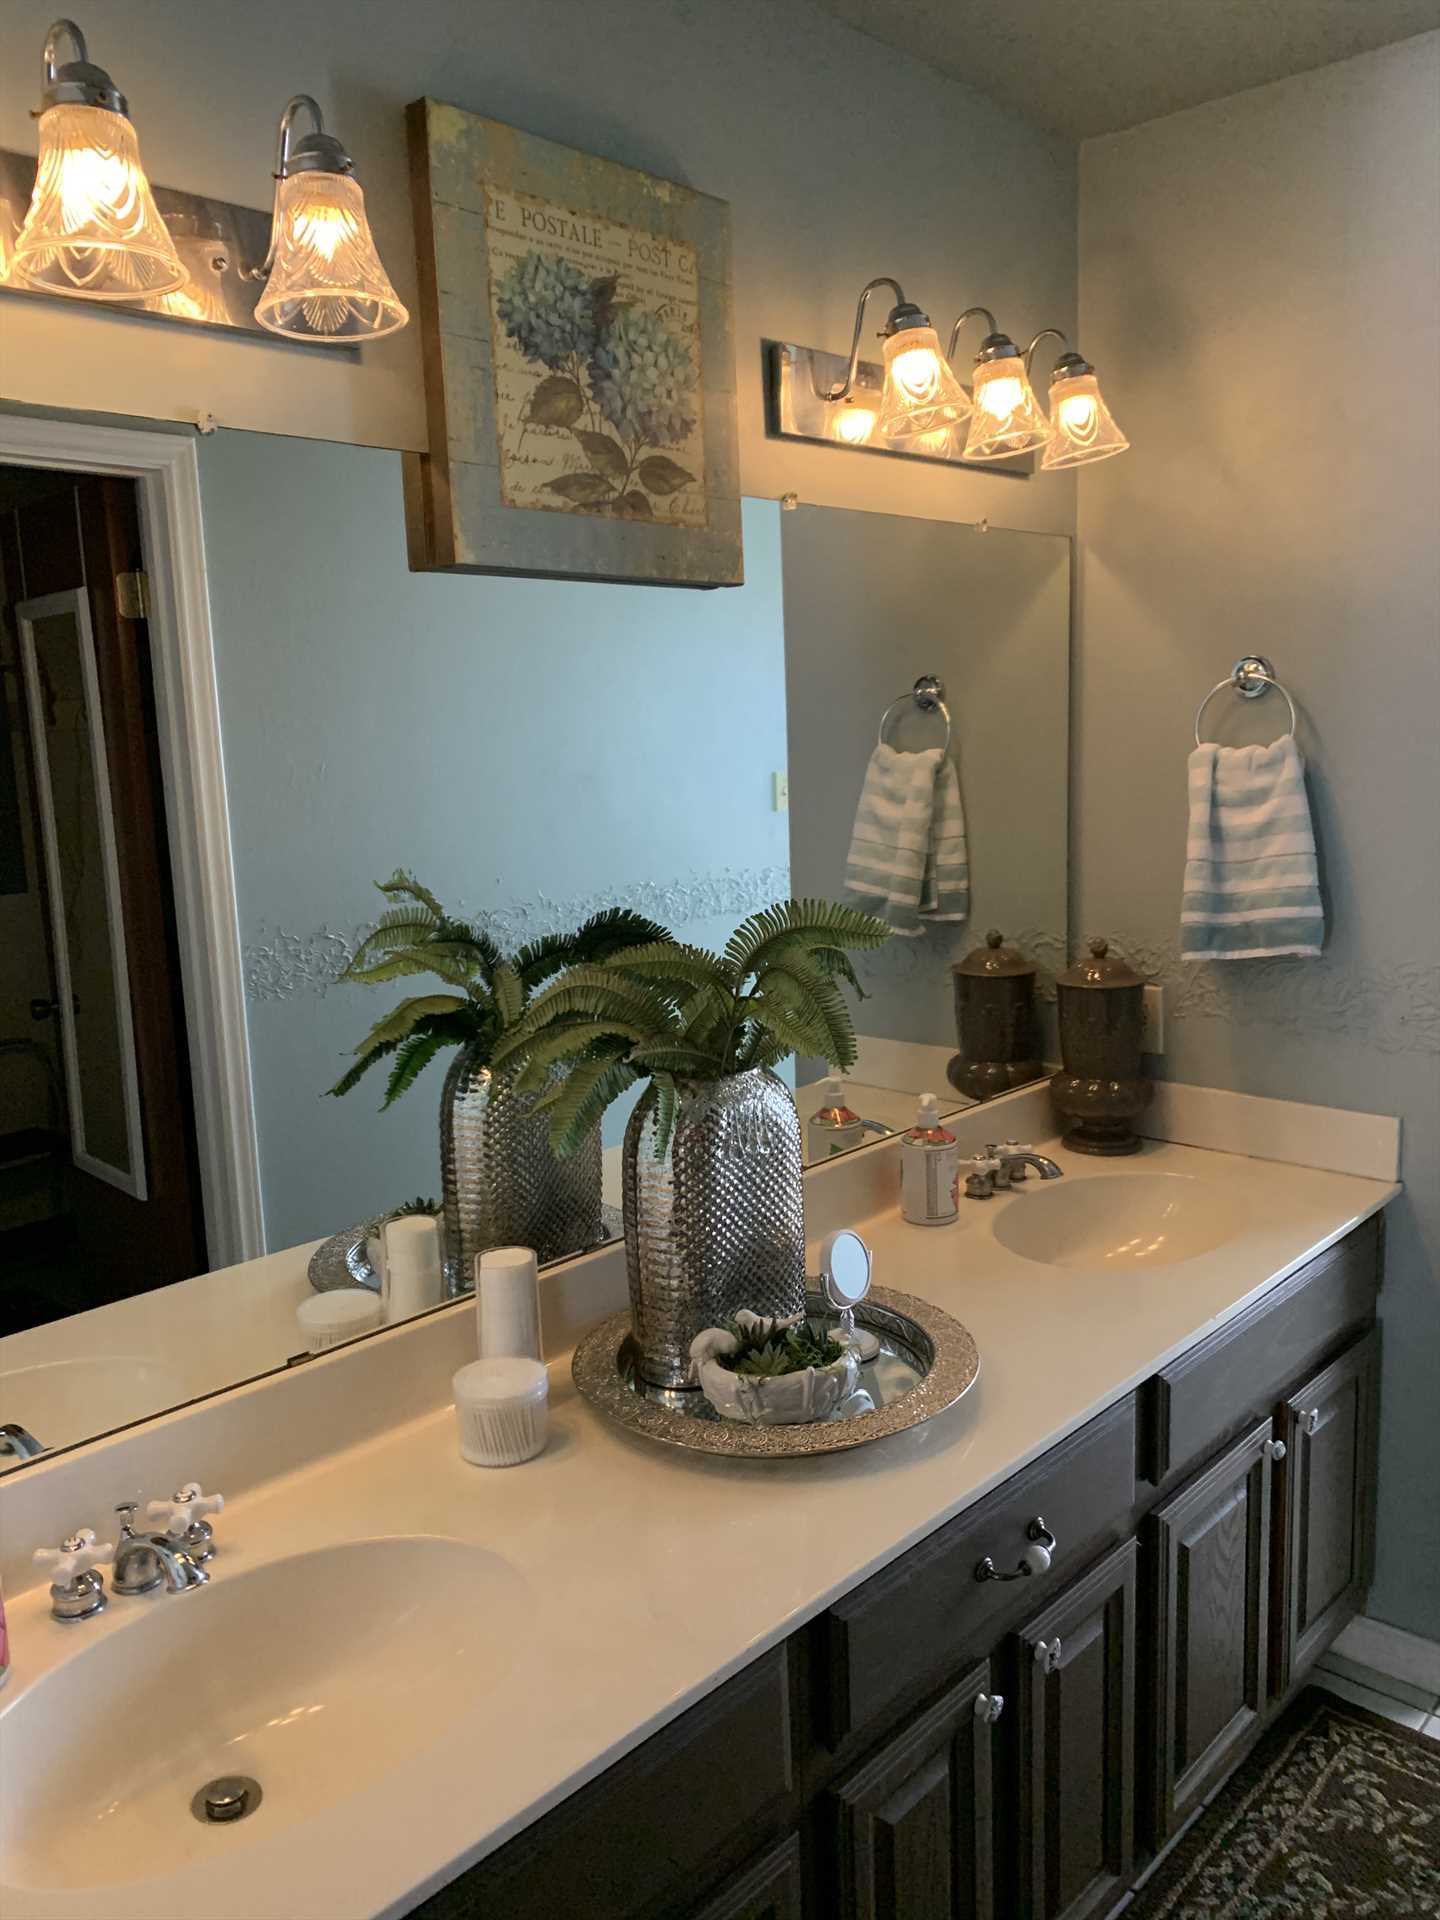                                                 Along with a roomy double vanity, the master bath comes with clean and fluffy bath linens, as well (as do all the baths here).